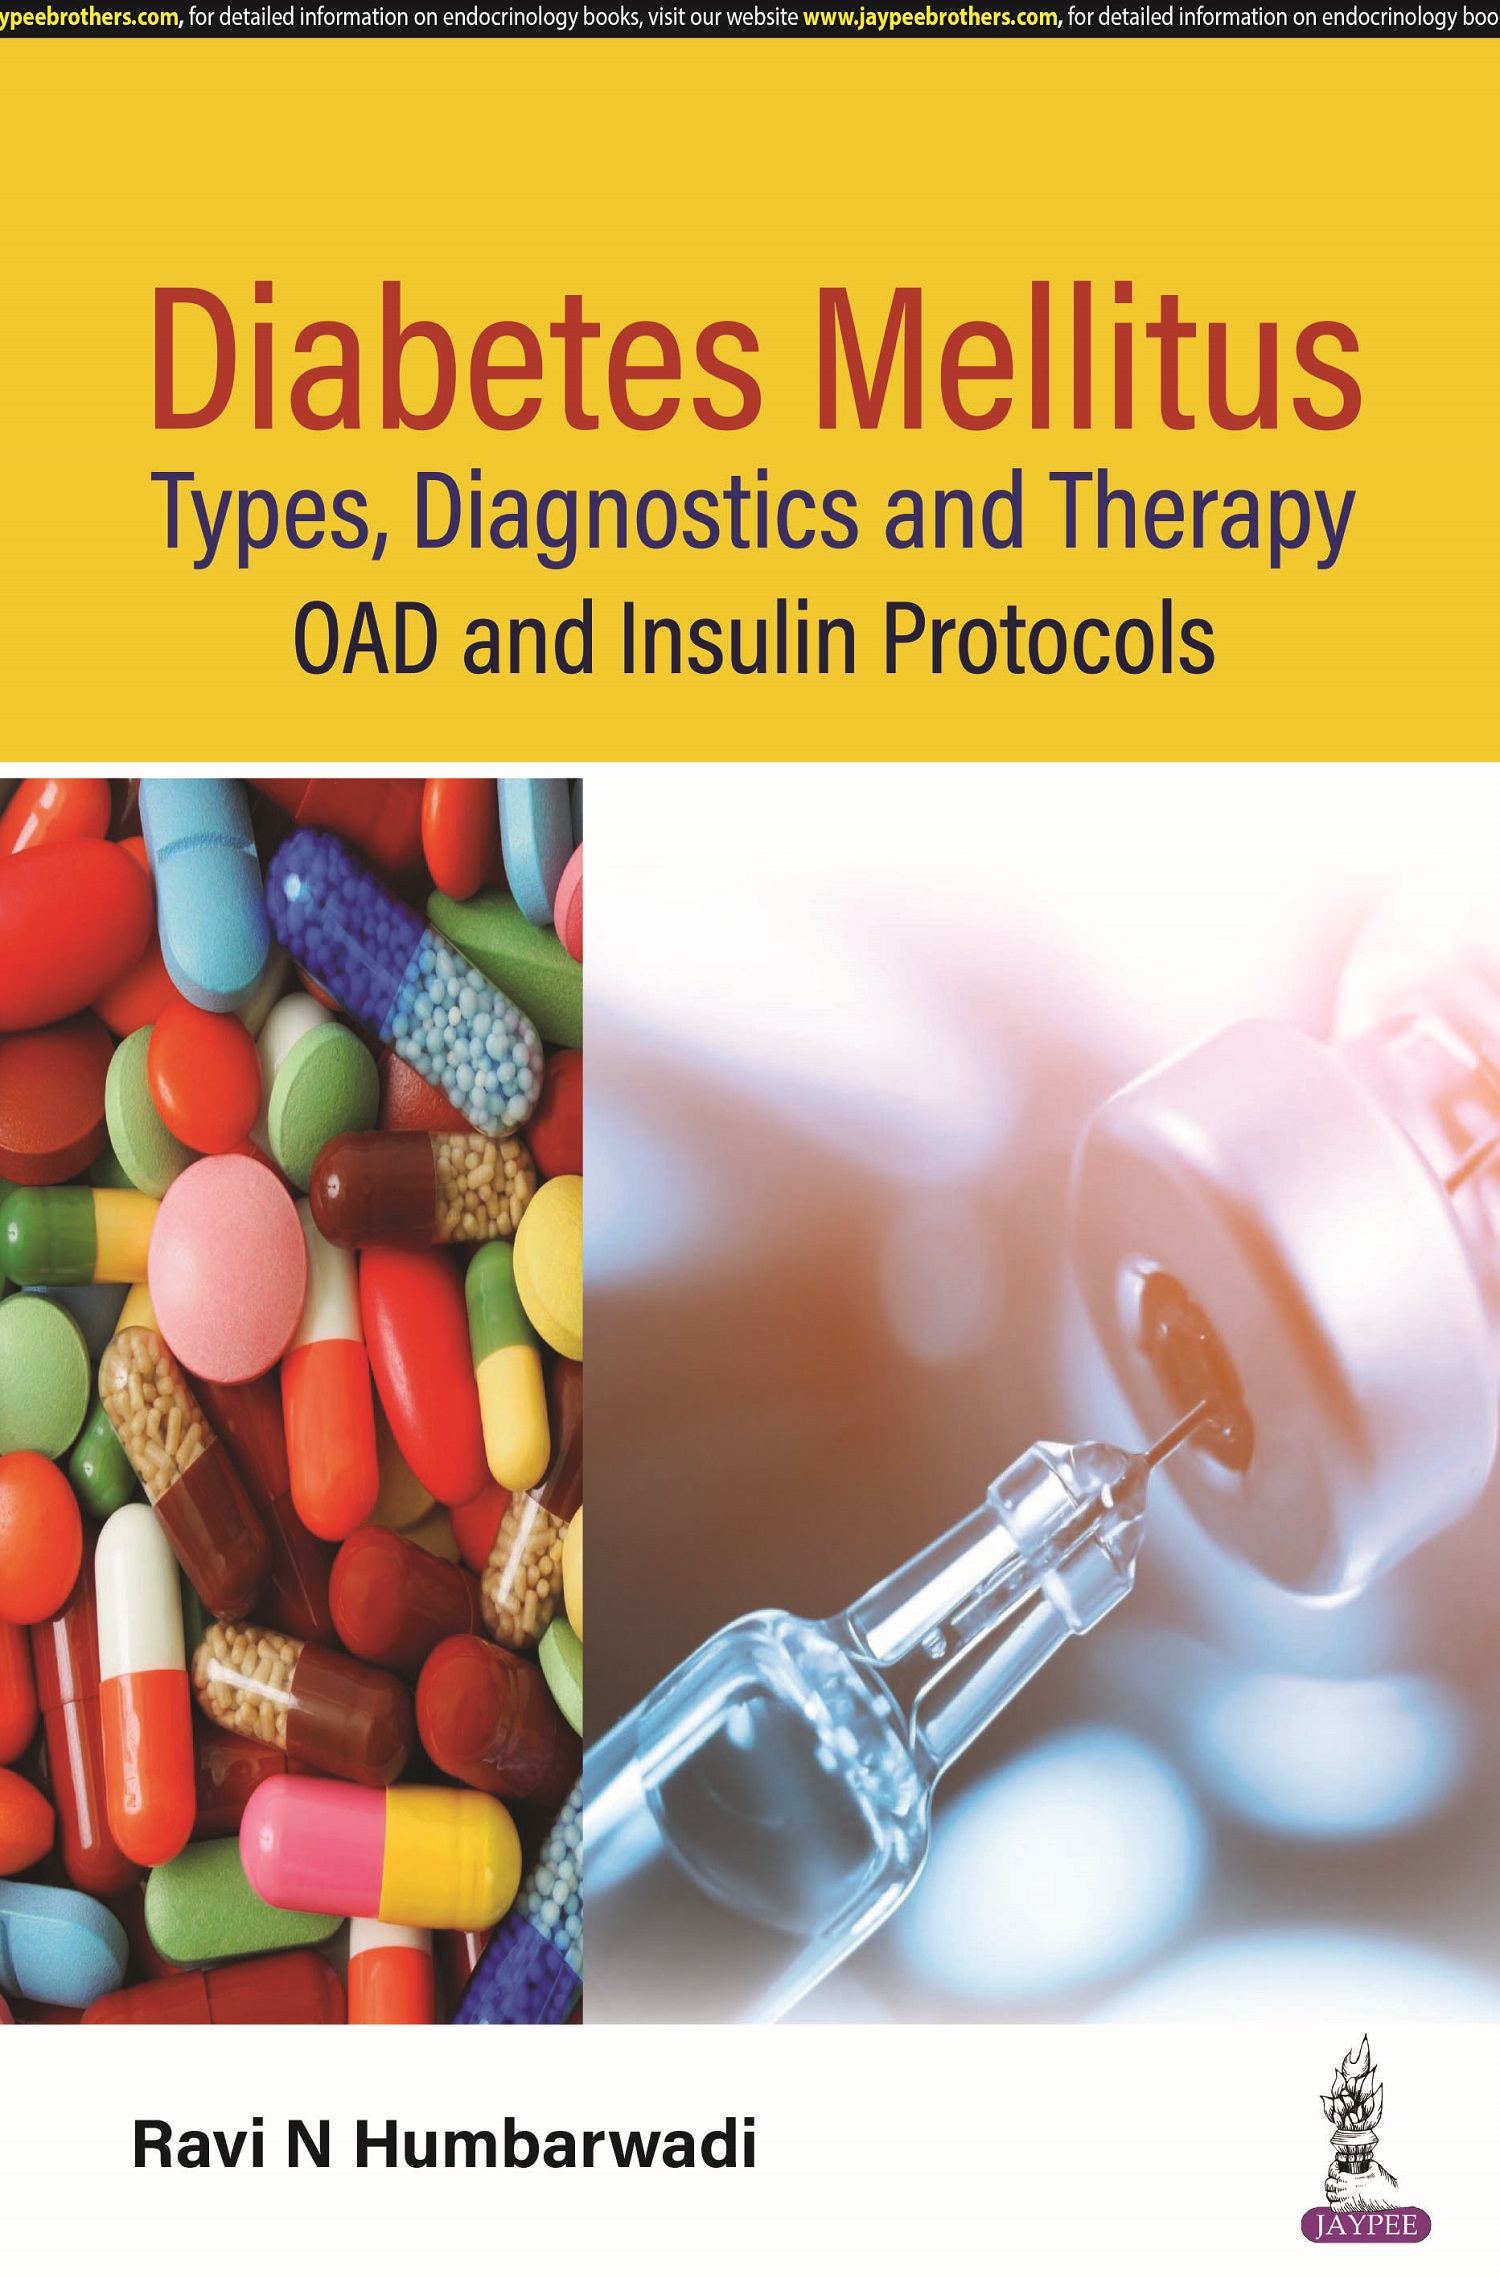 Diabetes Mellitus- Types, Diagnostics and Therapy: OAD and Insulin Protocols